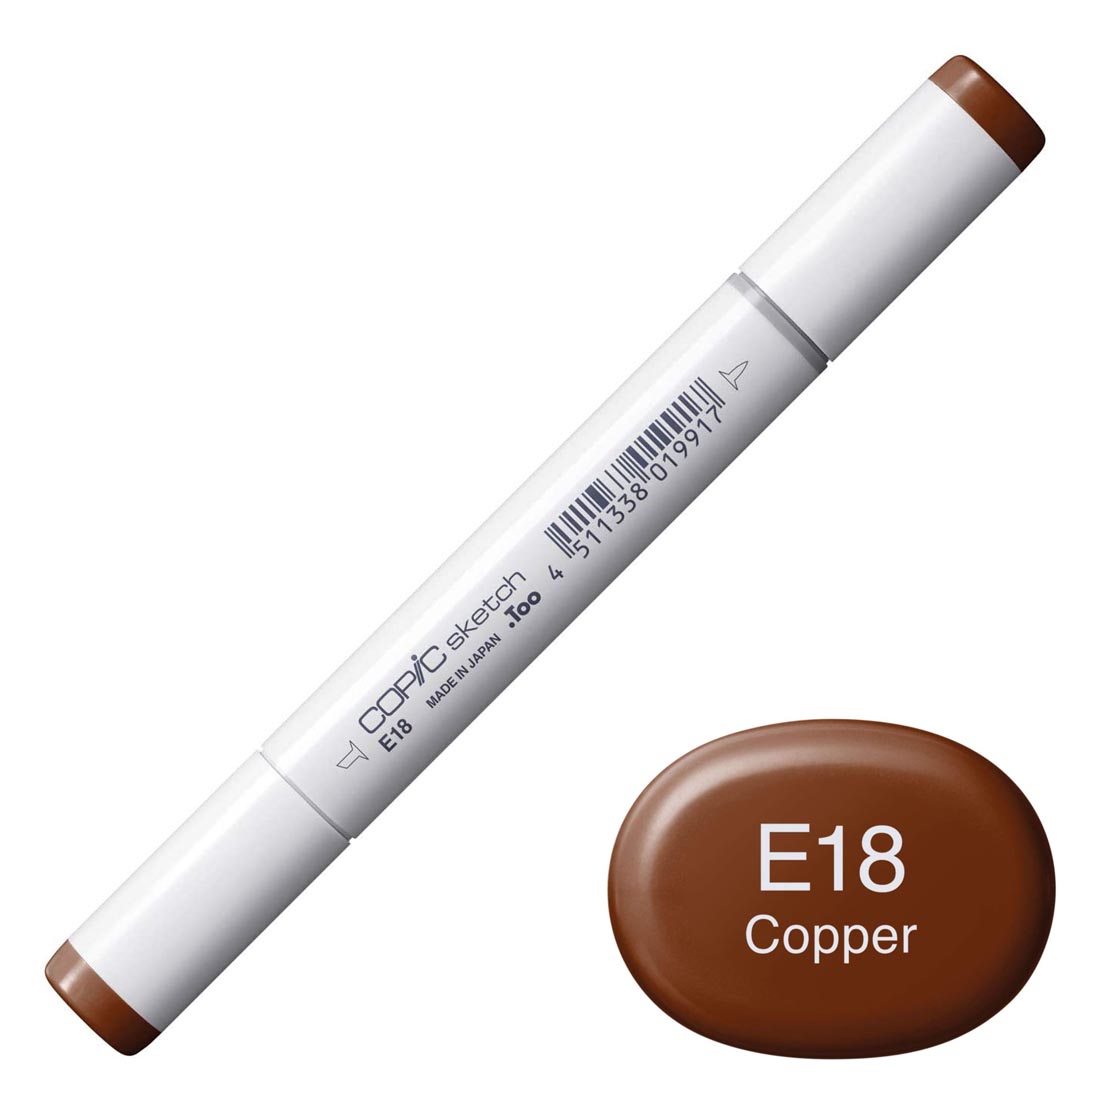 COPIC Sketch Marker with a color swatch and text of E18 Copper